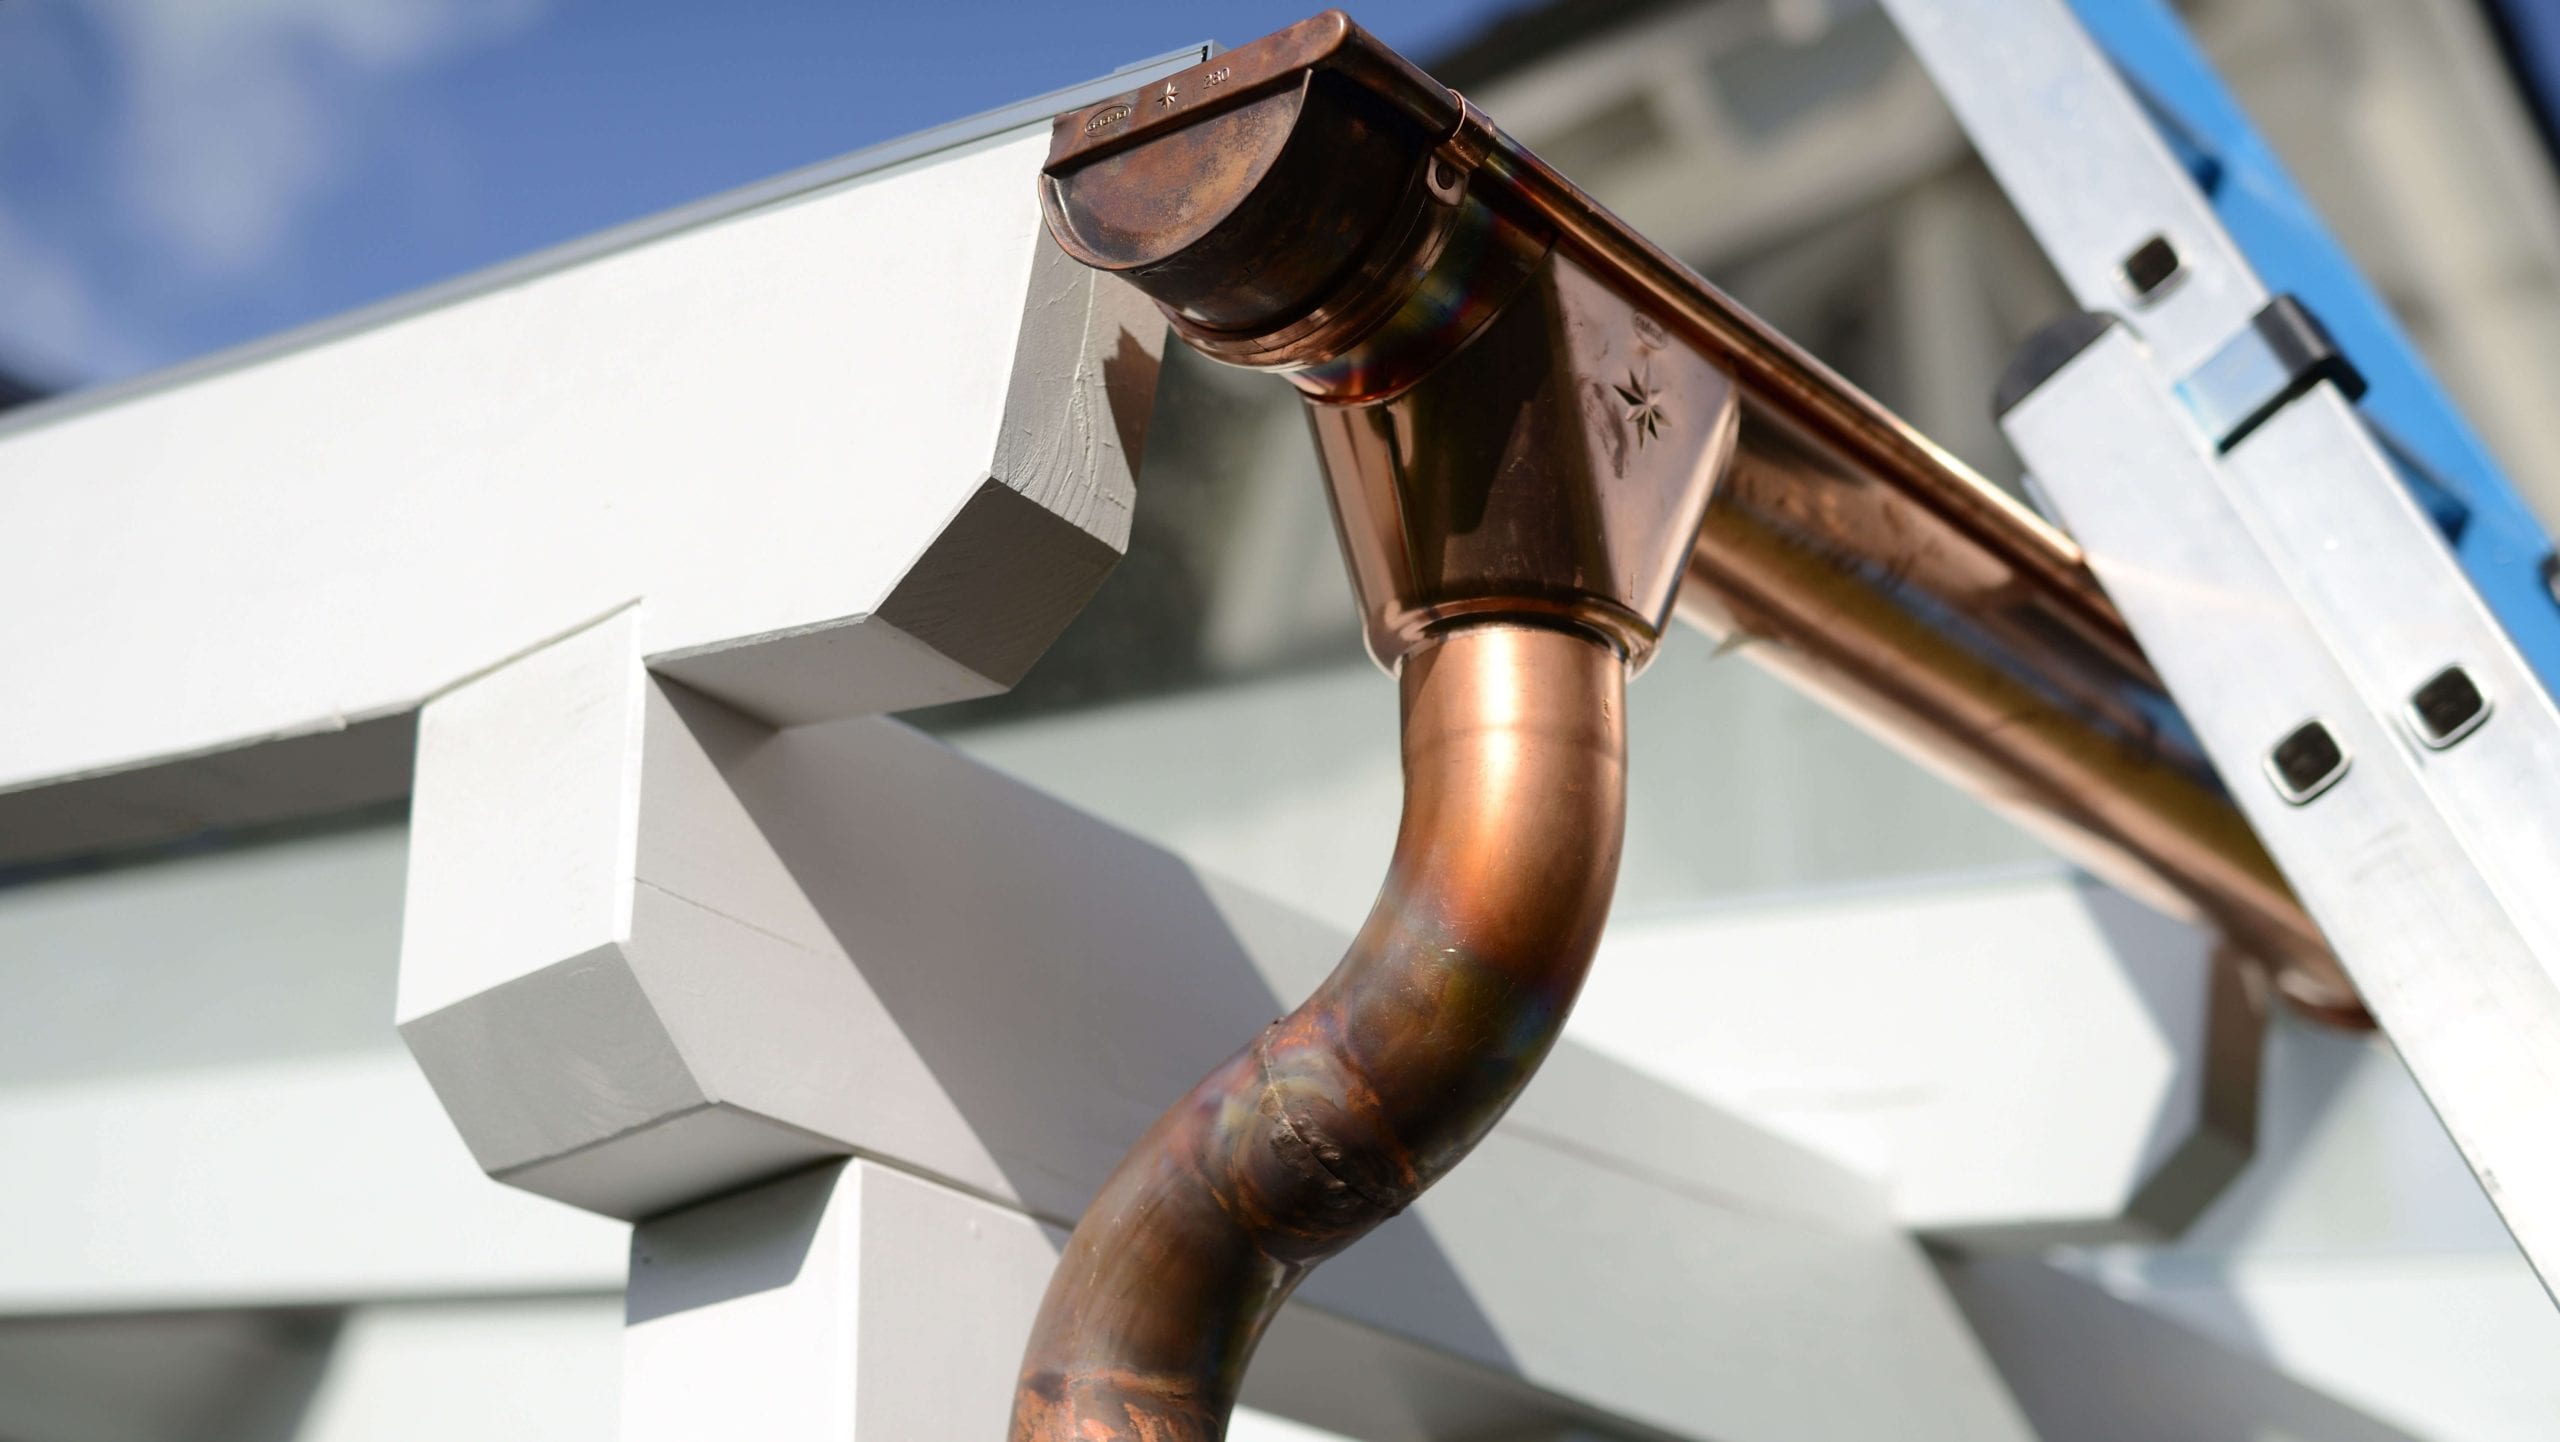 Make your property stand out with copper gutters. Contact for gutter installation in Gulfport